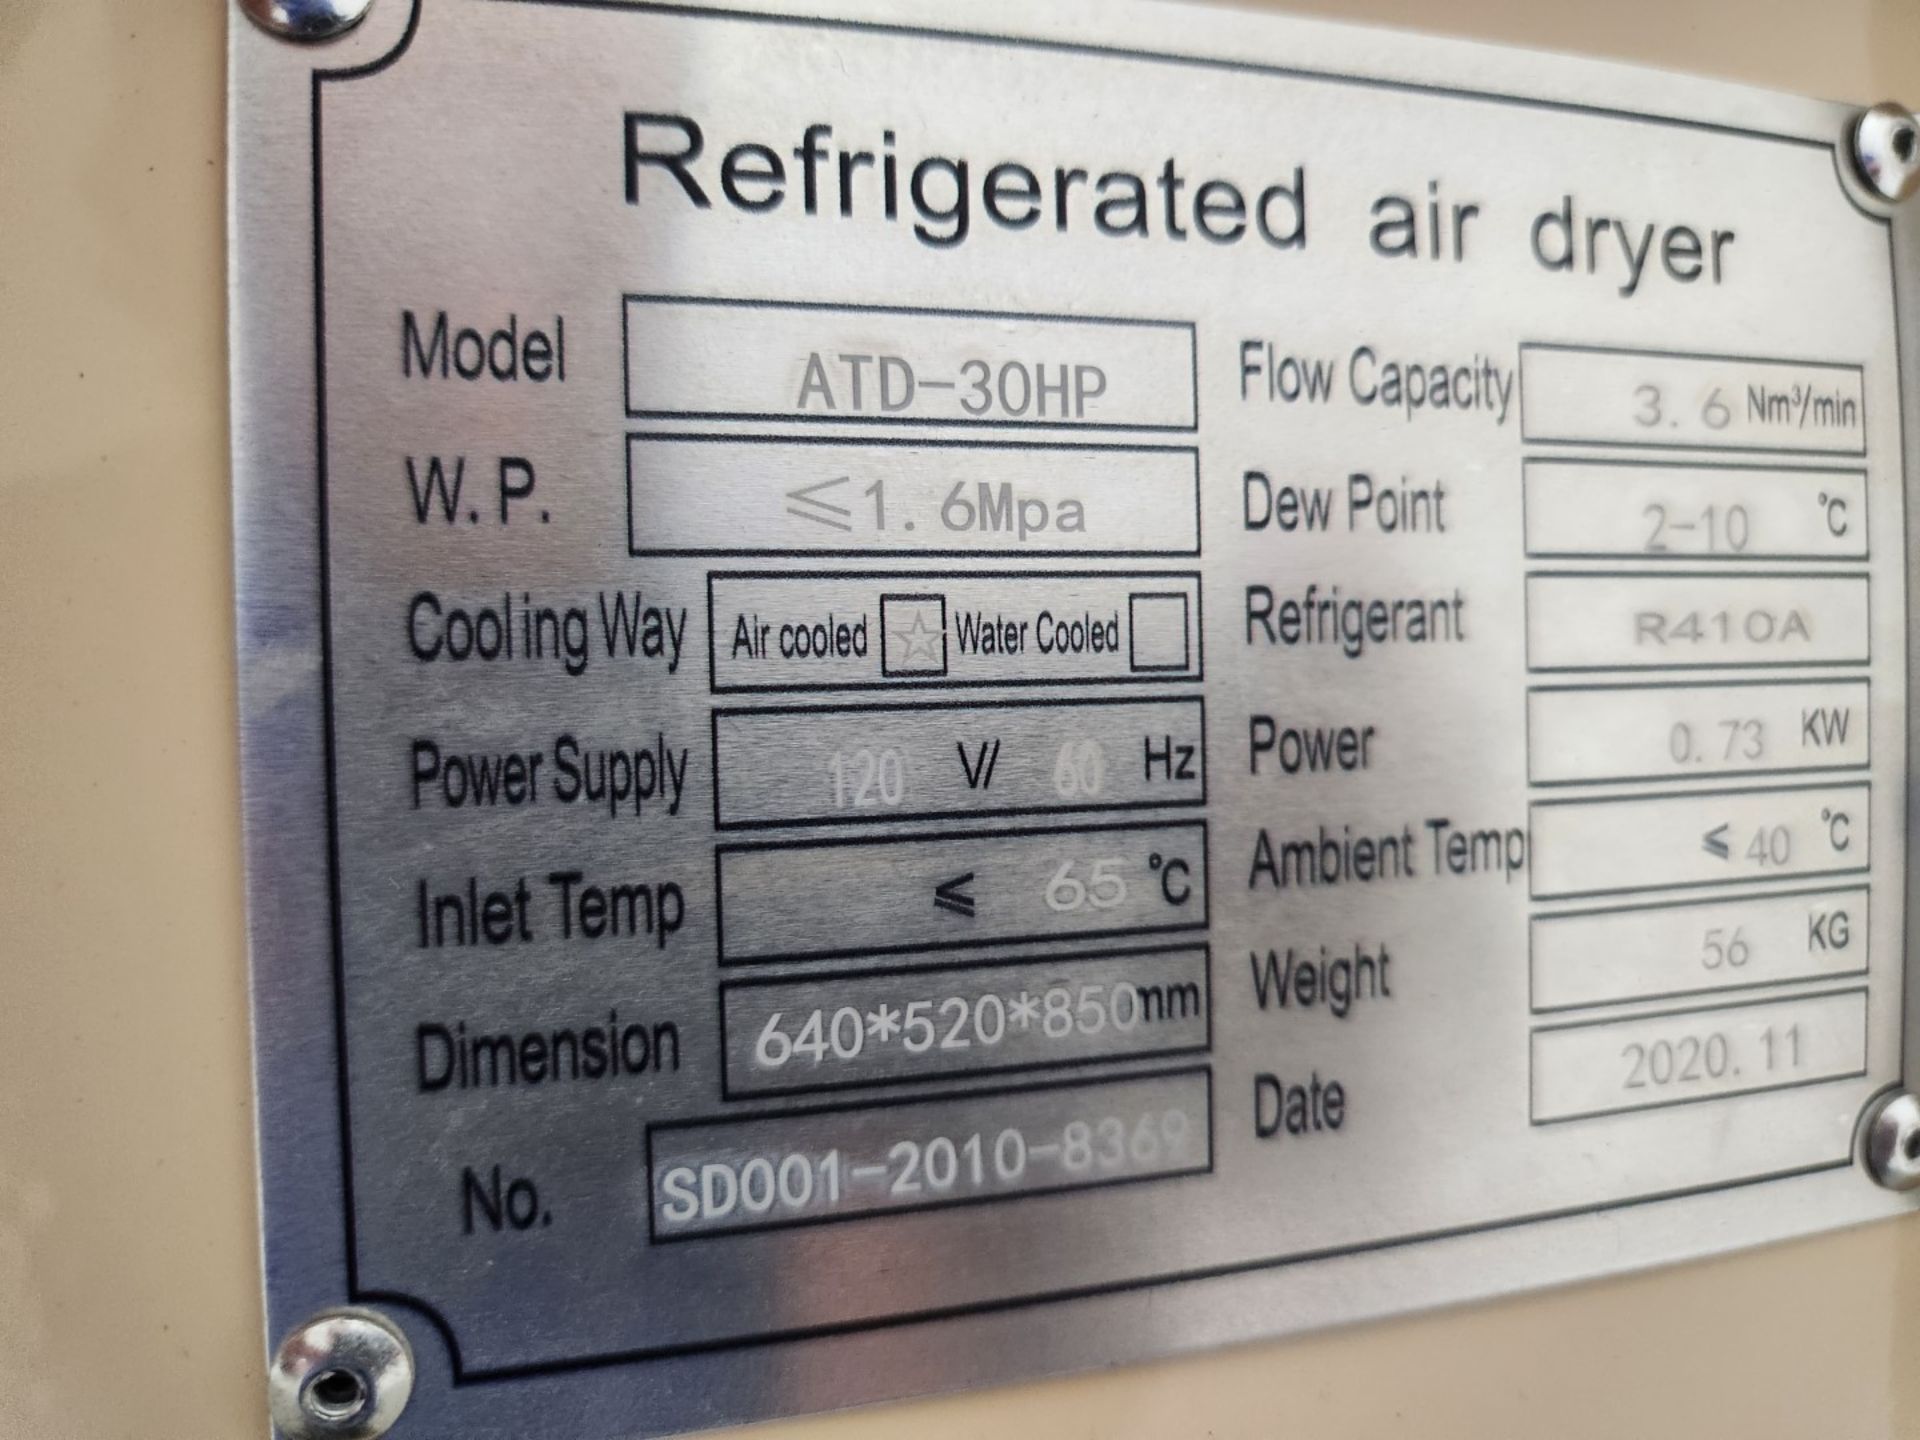 Airtech ATD-30HP Refrigerated Air Dryer, made in 2020. {TAG: 1180000} - Image 3 of 3